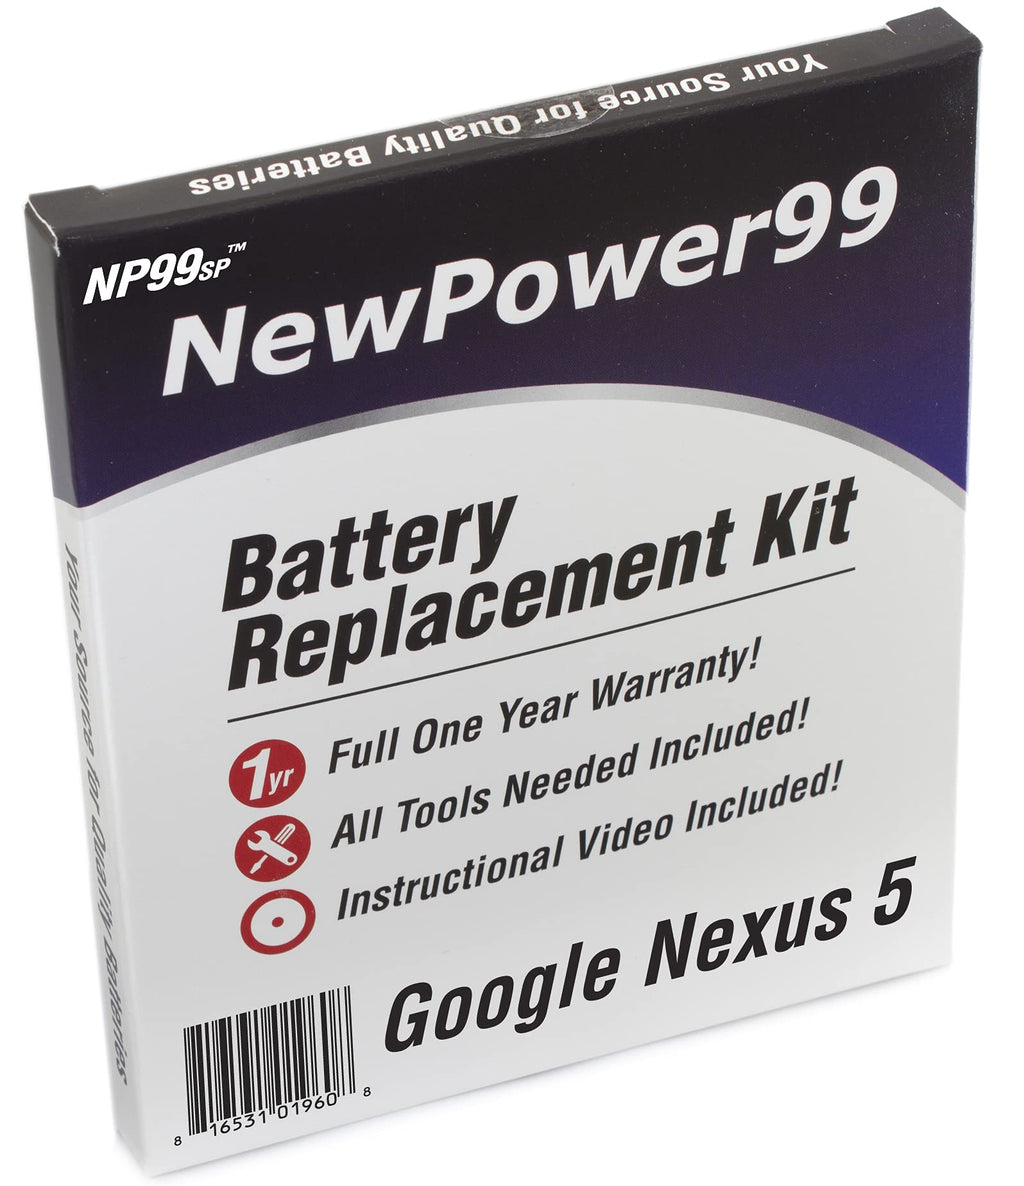 NewPower99 Battery Kit for Google Nexus 5 with Tools, Video Instructions, Long Life Battery